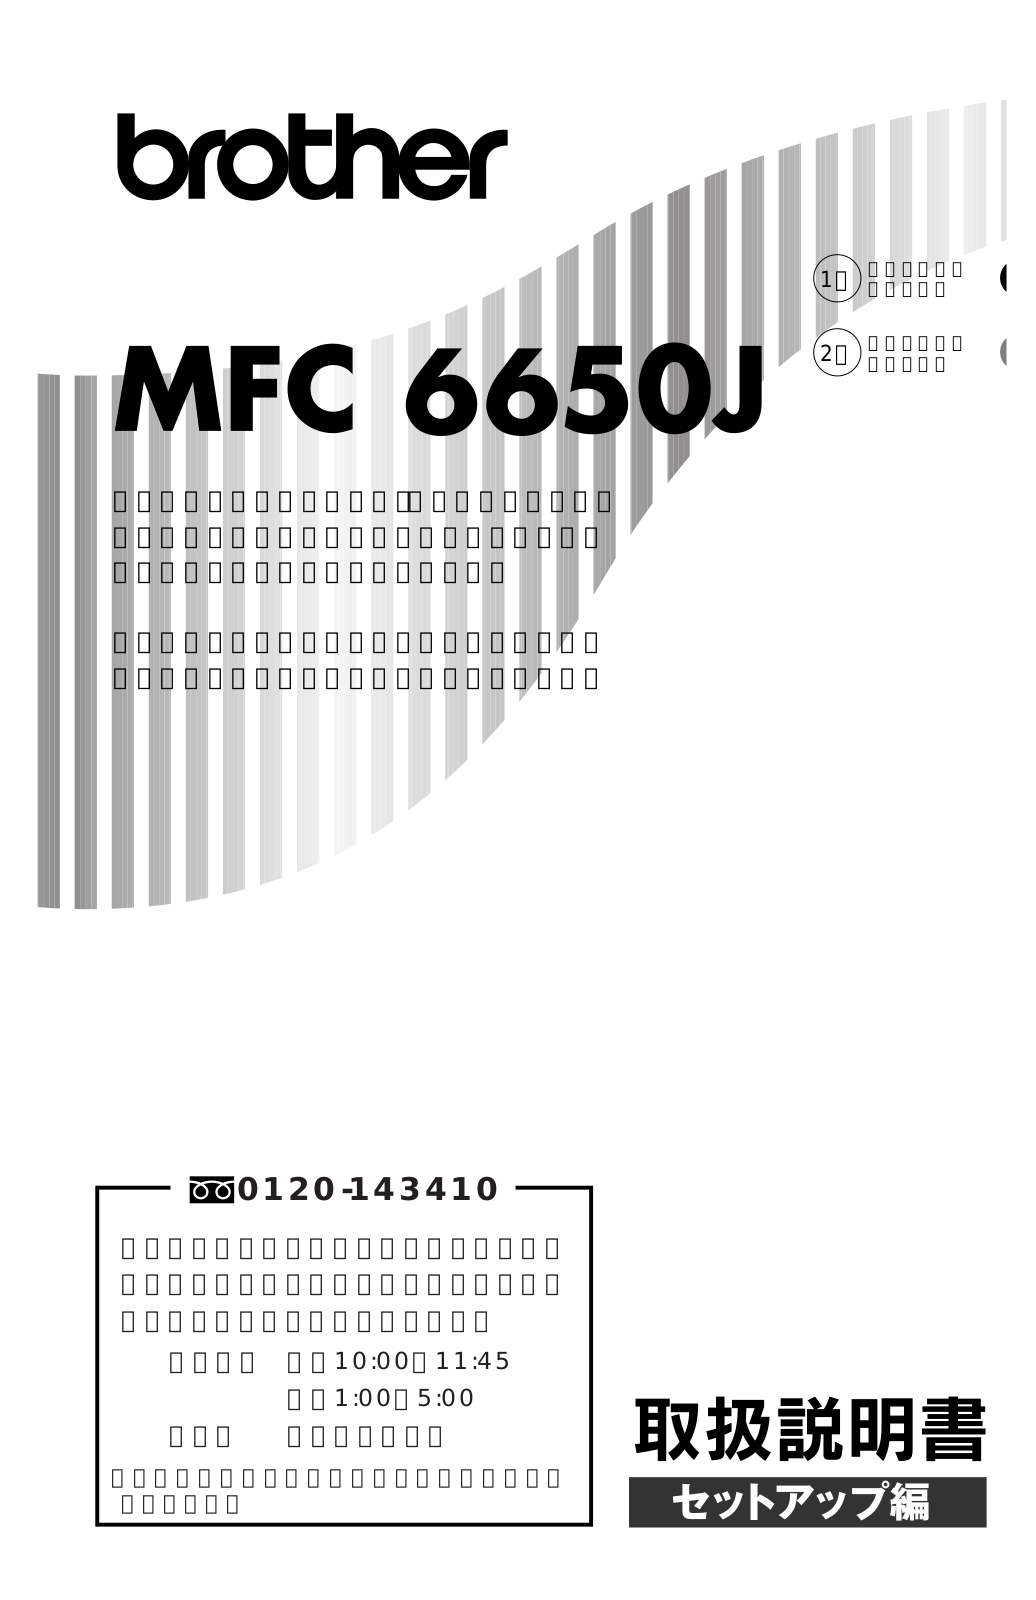 Brother MFC-6650J Easy installation guide